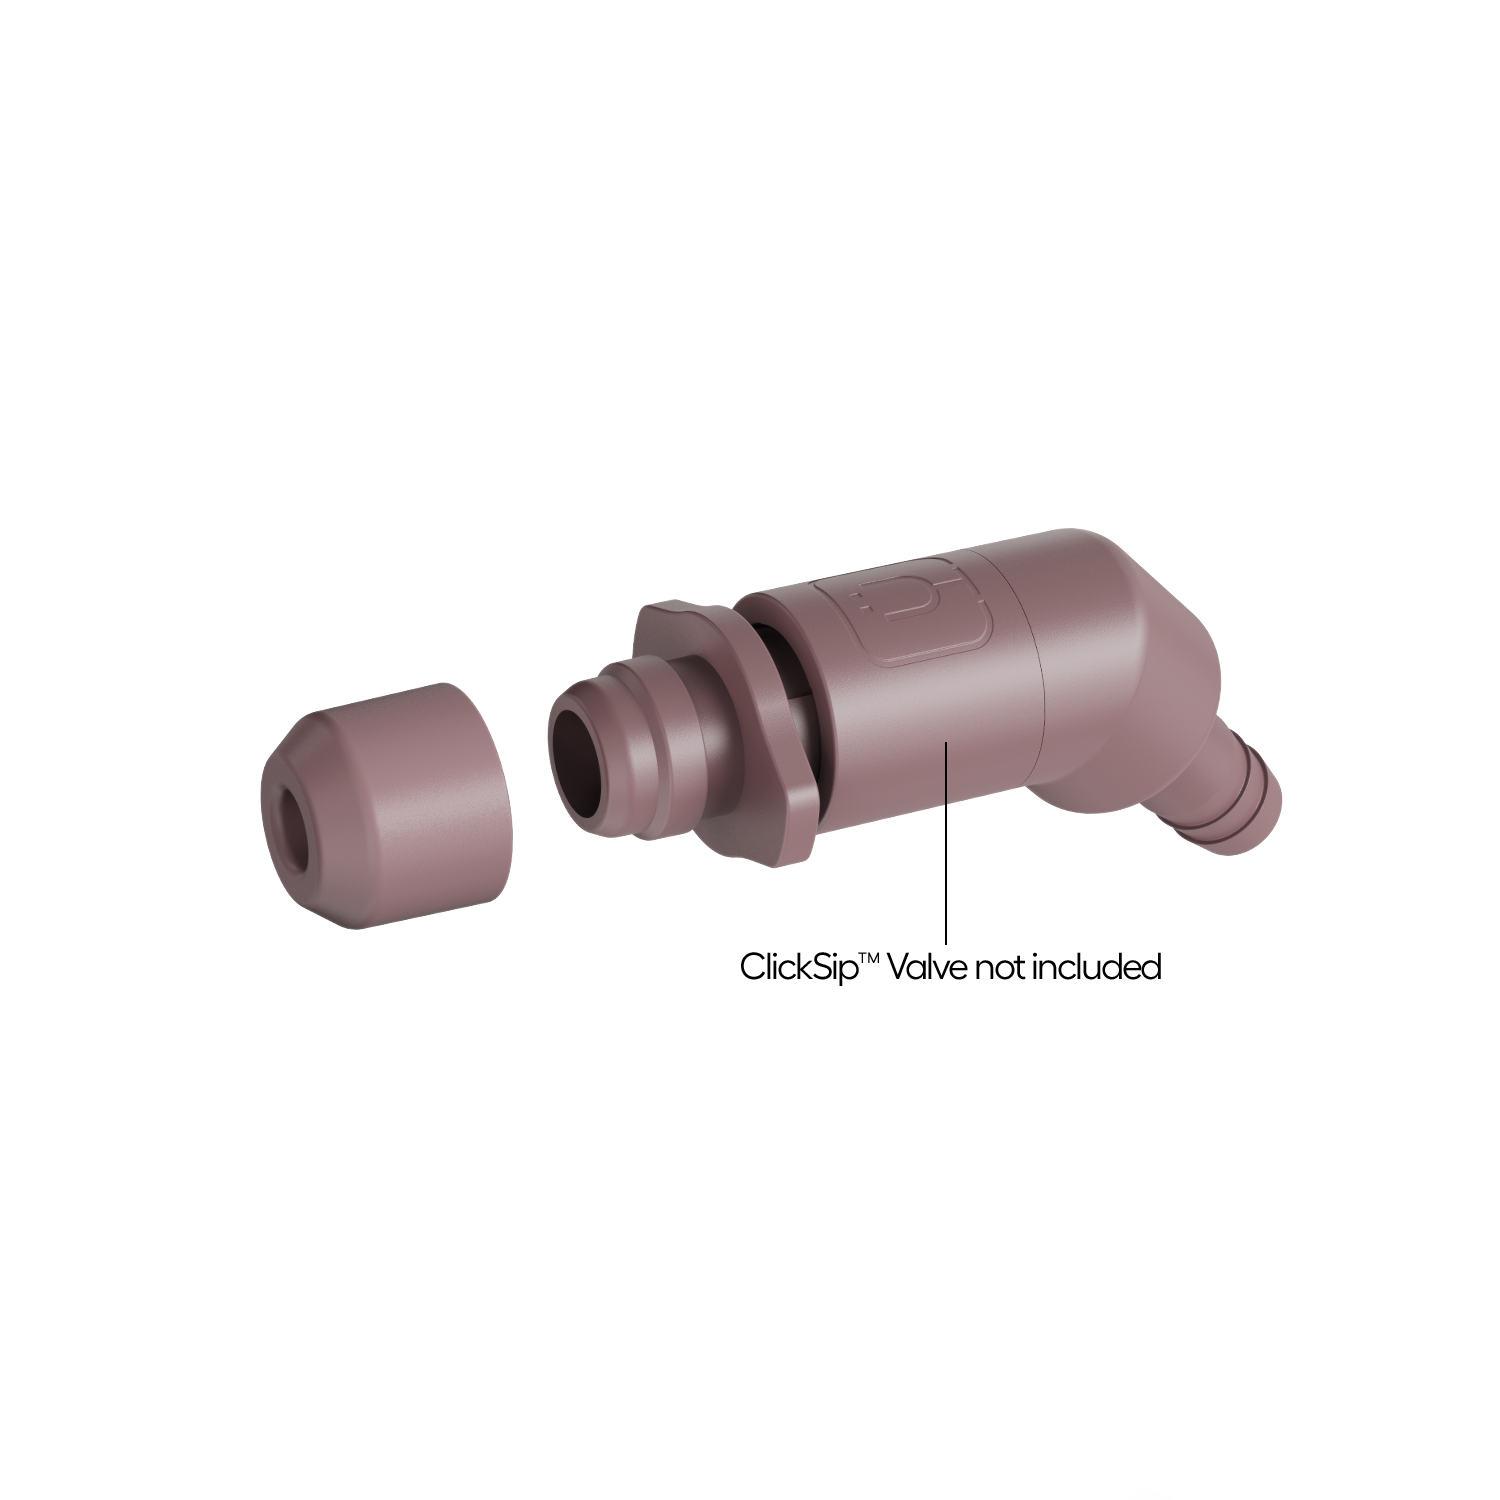 Paragon Replacement Mouth Piece - Rose Taupe (Pack of 5)